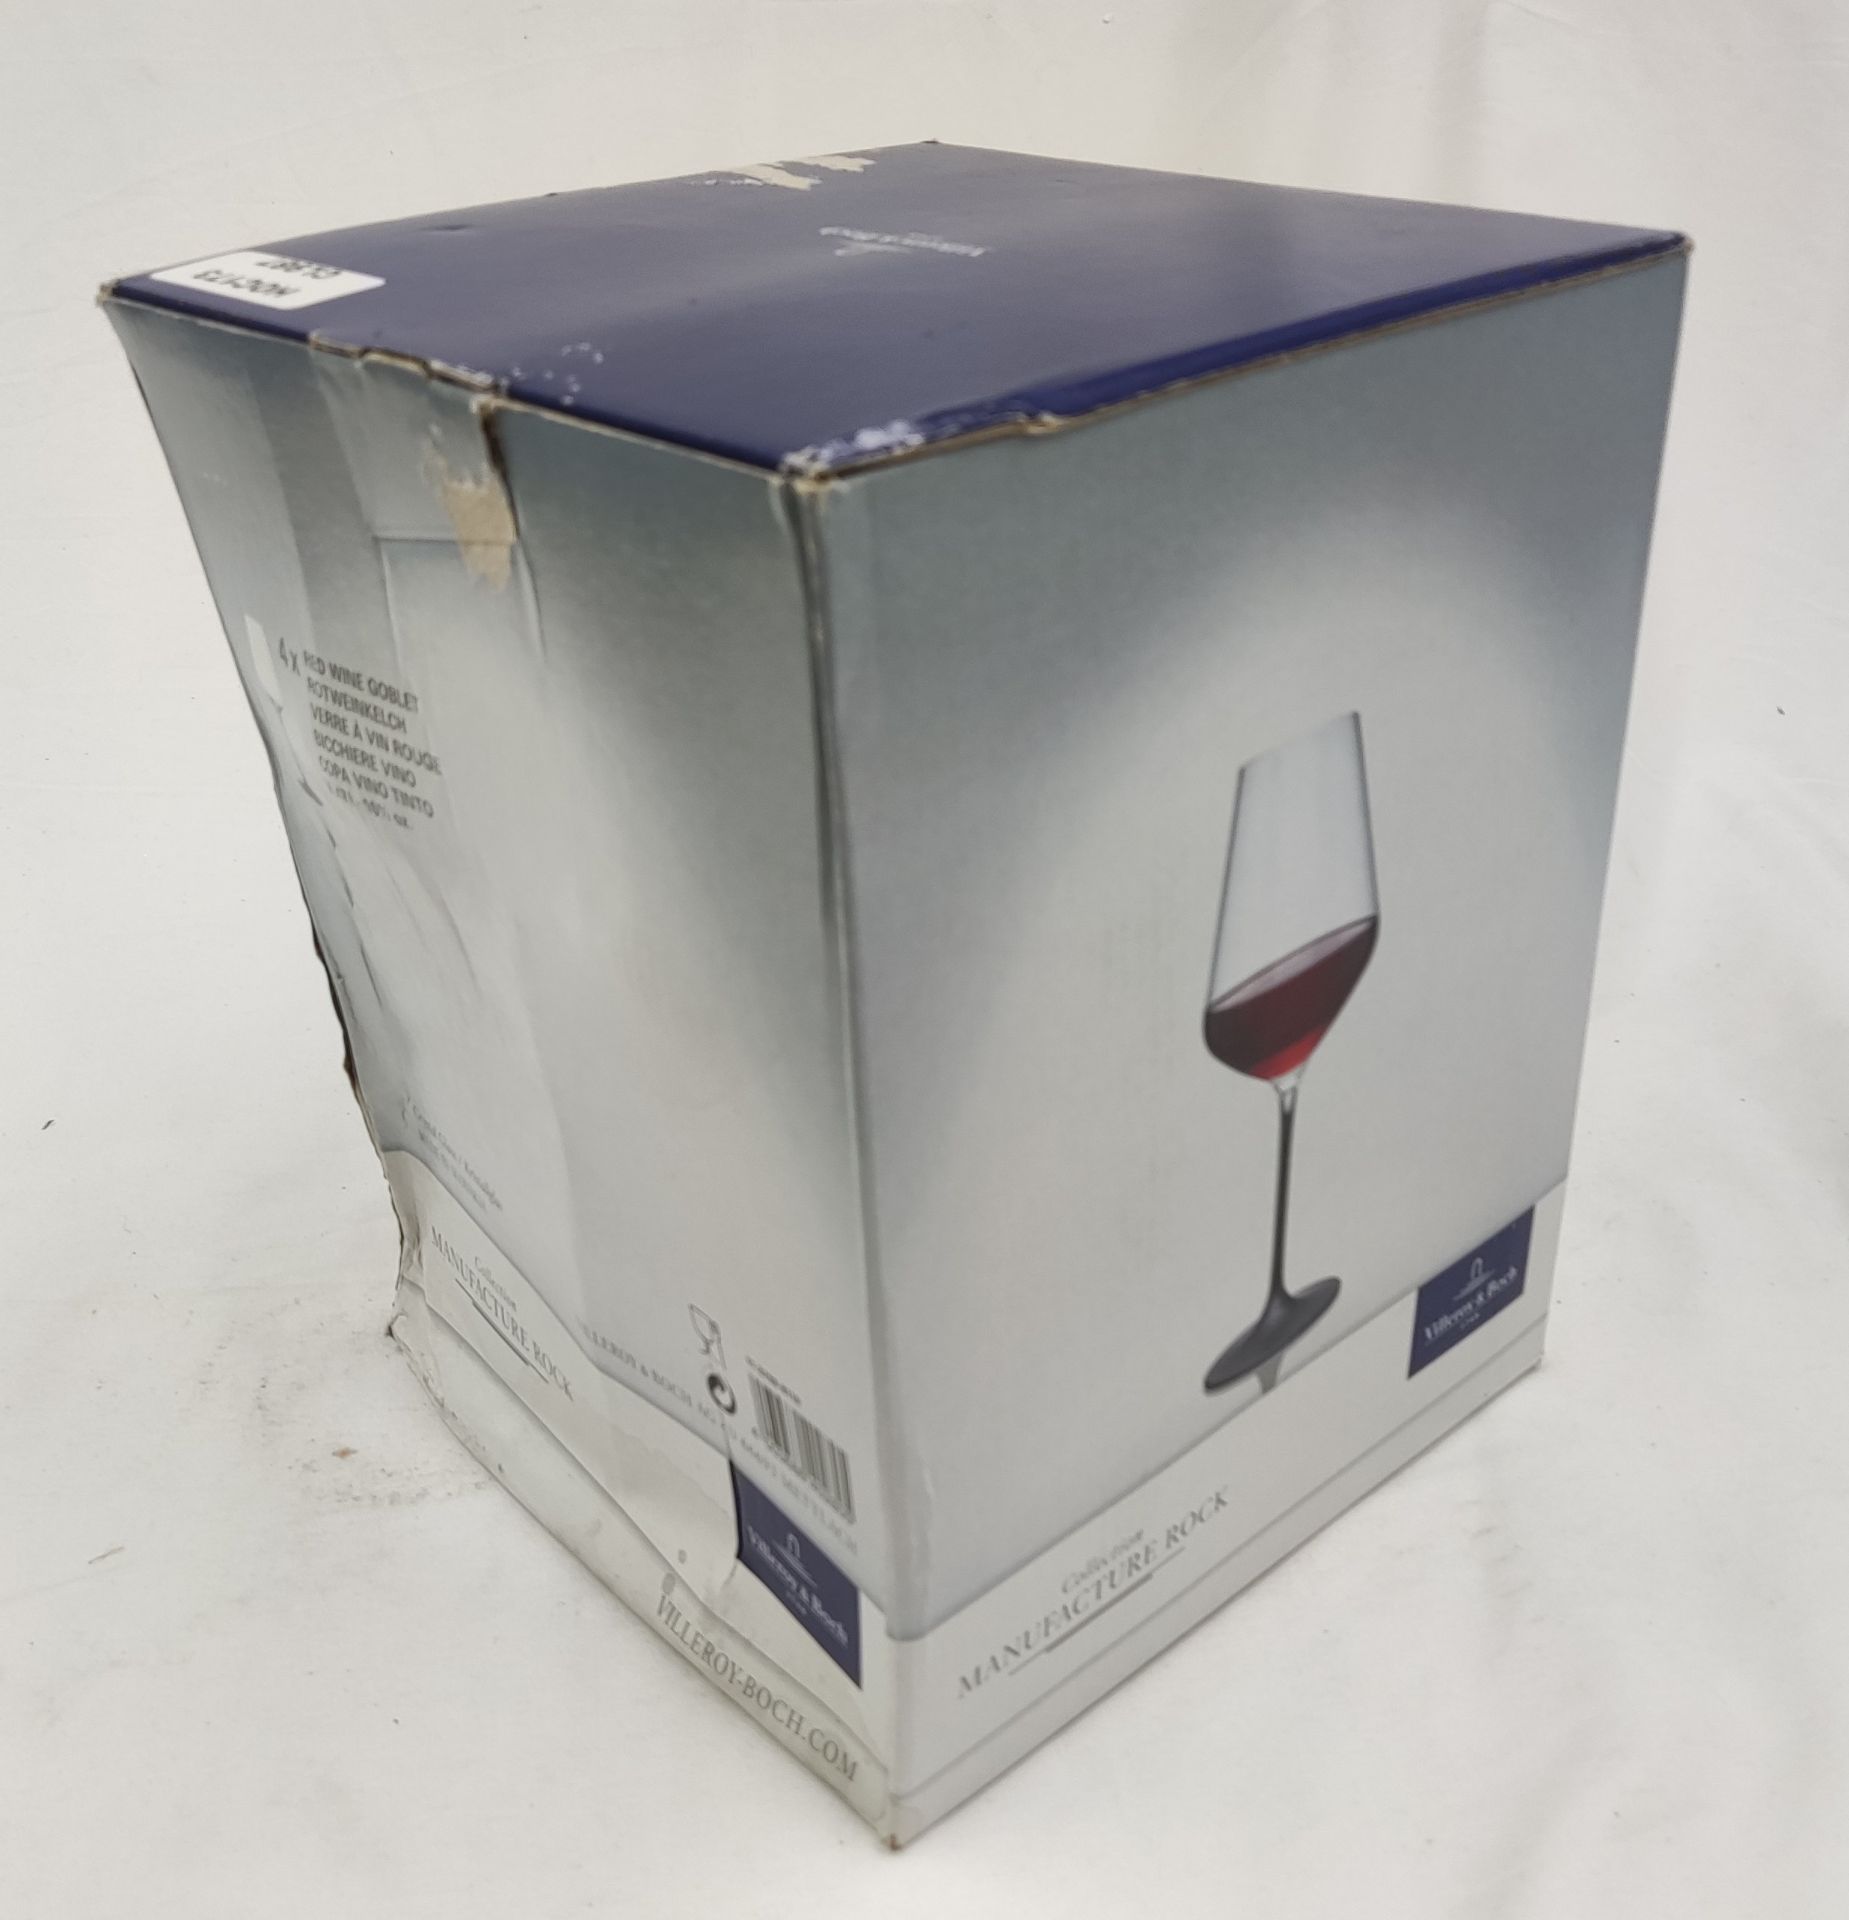 1 x VILLEROY & BOCH Manufacture Rock Red Wine Goblet Set, 4 Piece - New And Boxed - RRP £66 - Ref: - Image 12 of 12